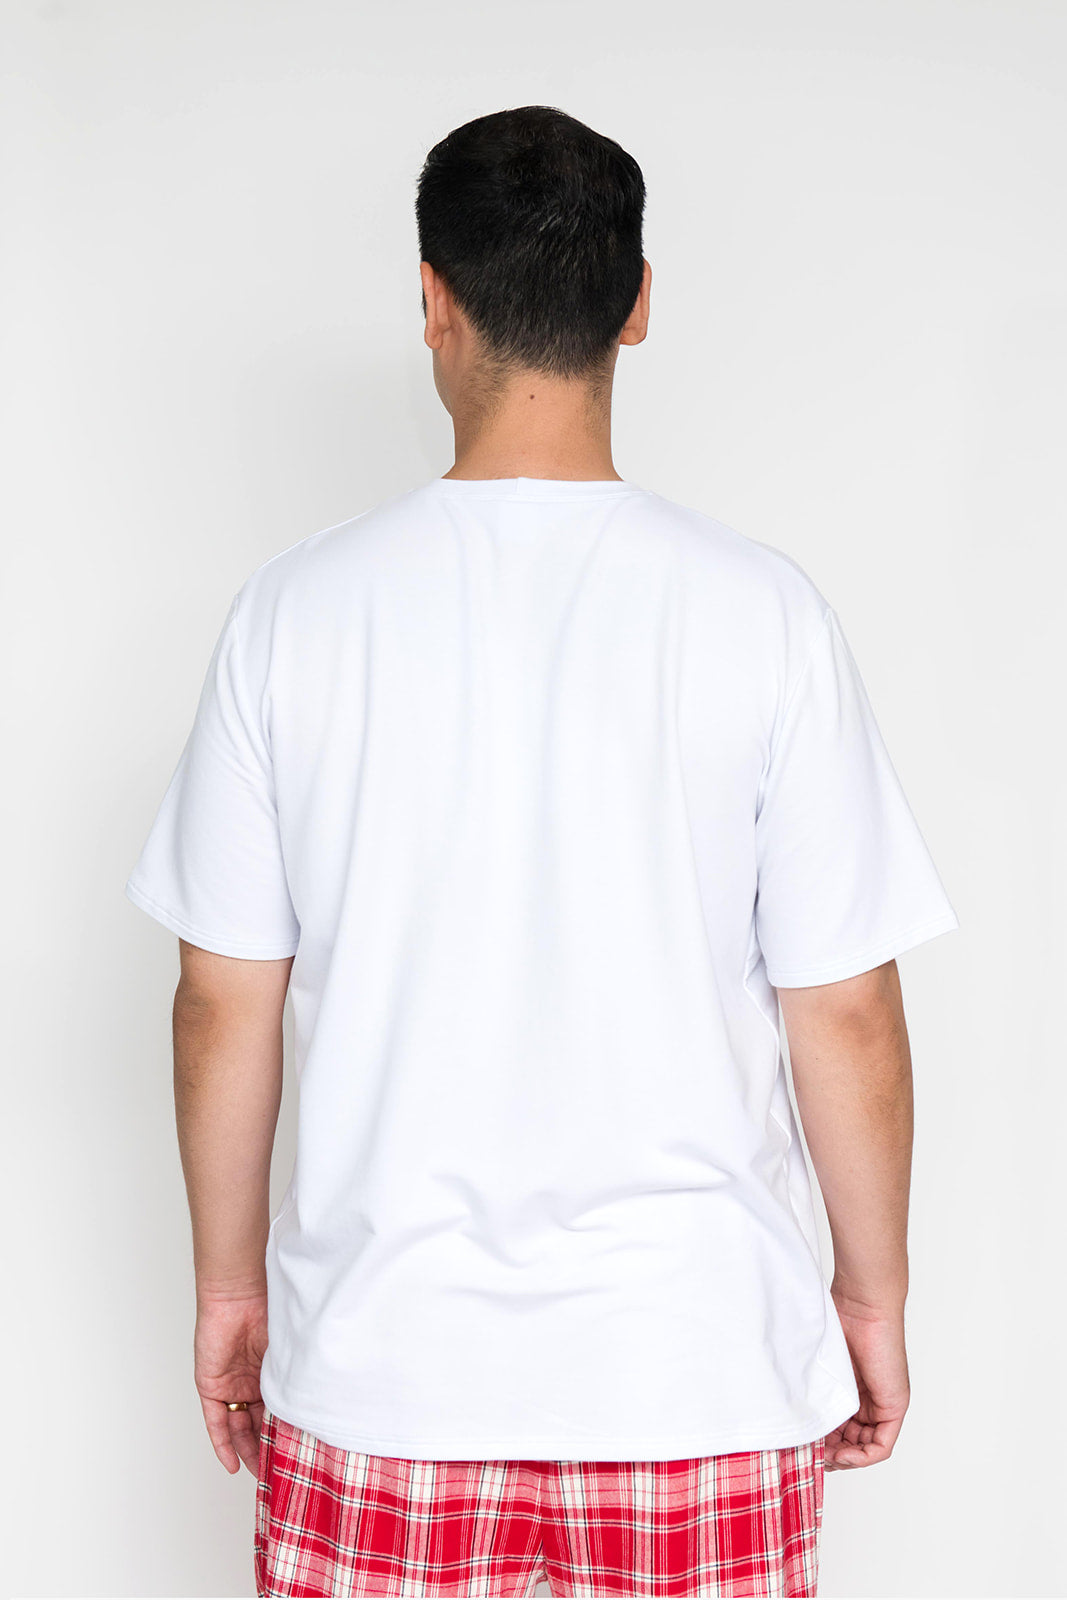 All Day Tee in Bright White